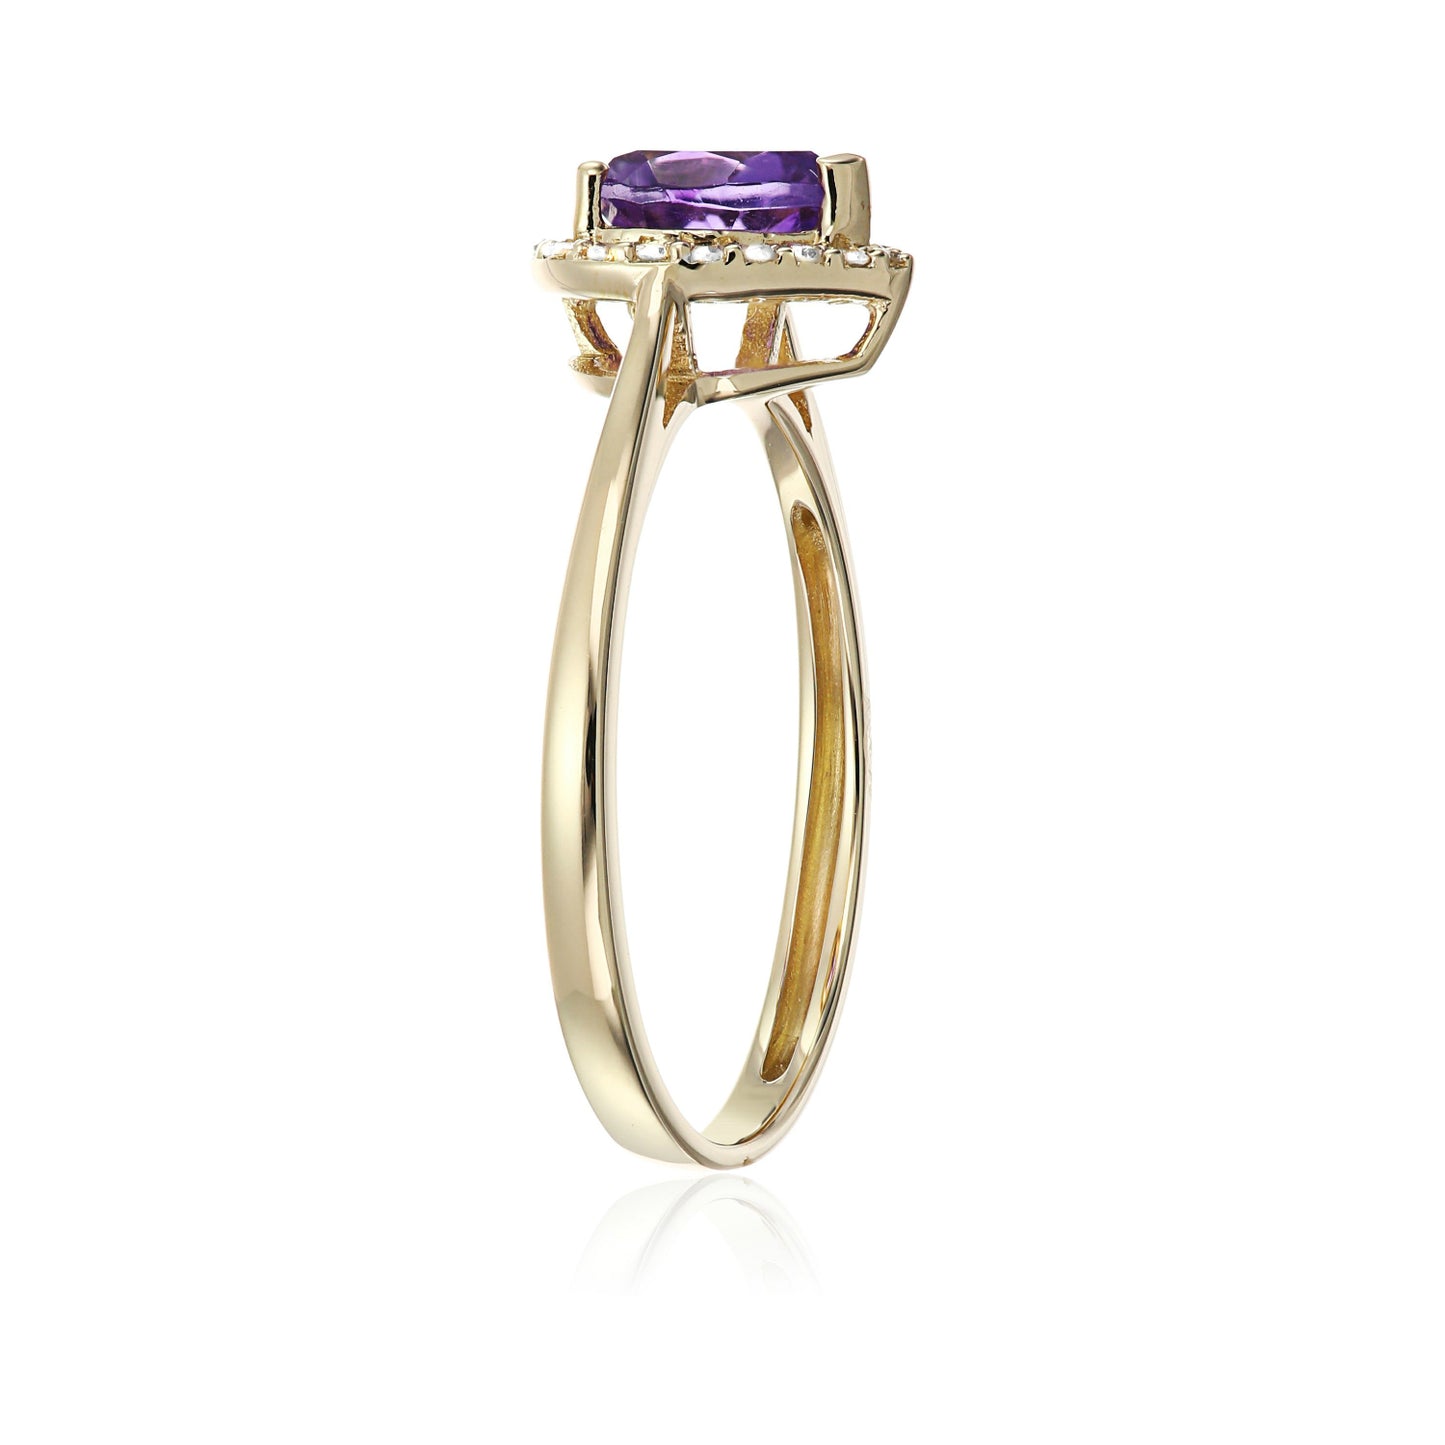 10k Yellow Gold African Amethyst and Diamond Solitaire Heart Halo Engagement Ring (1/10cttw, H-I Color, I1-I2 Clarity), - pinctore